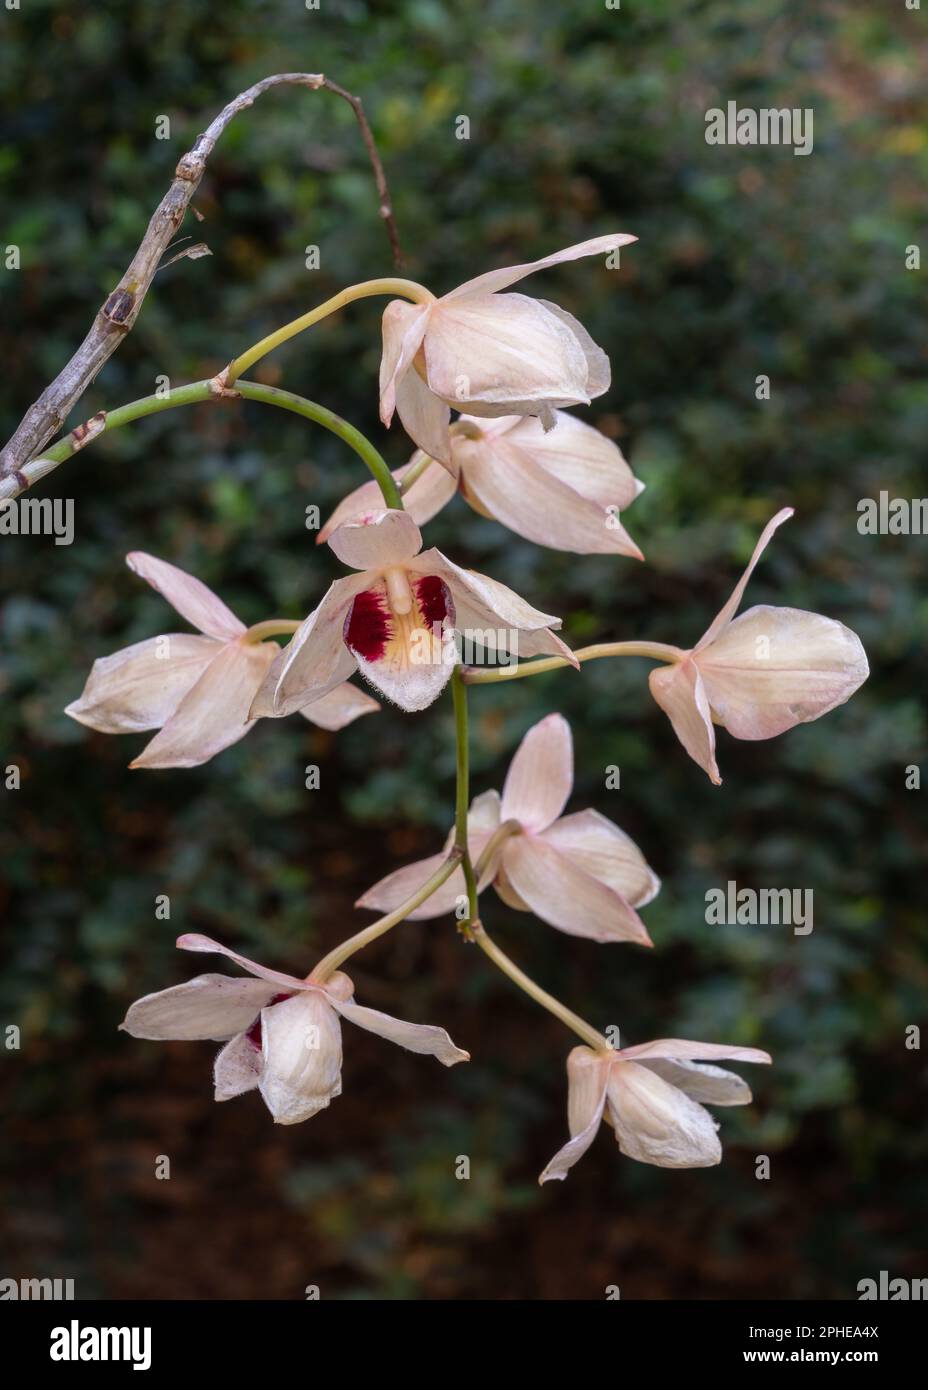 Closeup view of tropical epiphytic orchid species dendrobium pulchellum aka charming dendrobium creamy white and purple flowers blooming outdoors Stock Photo